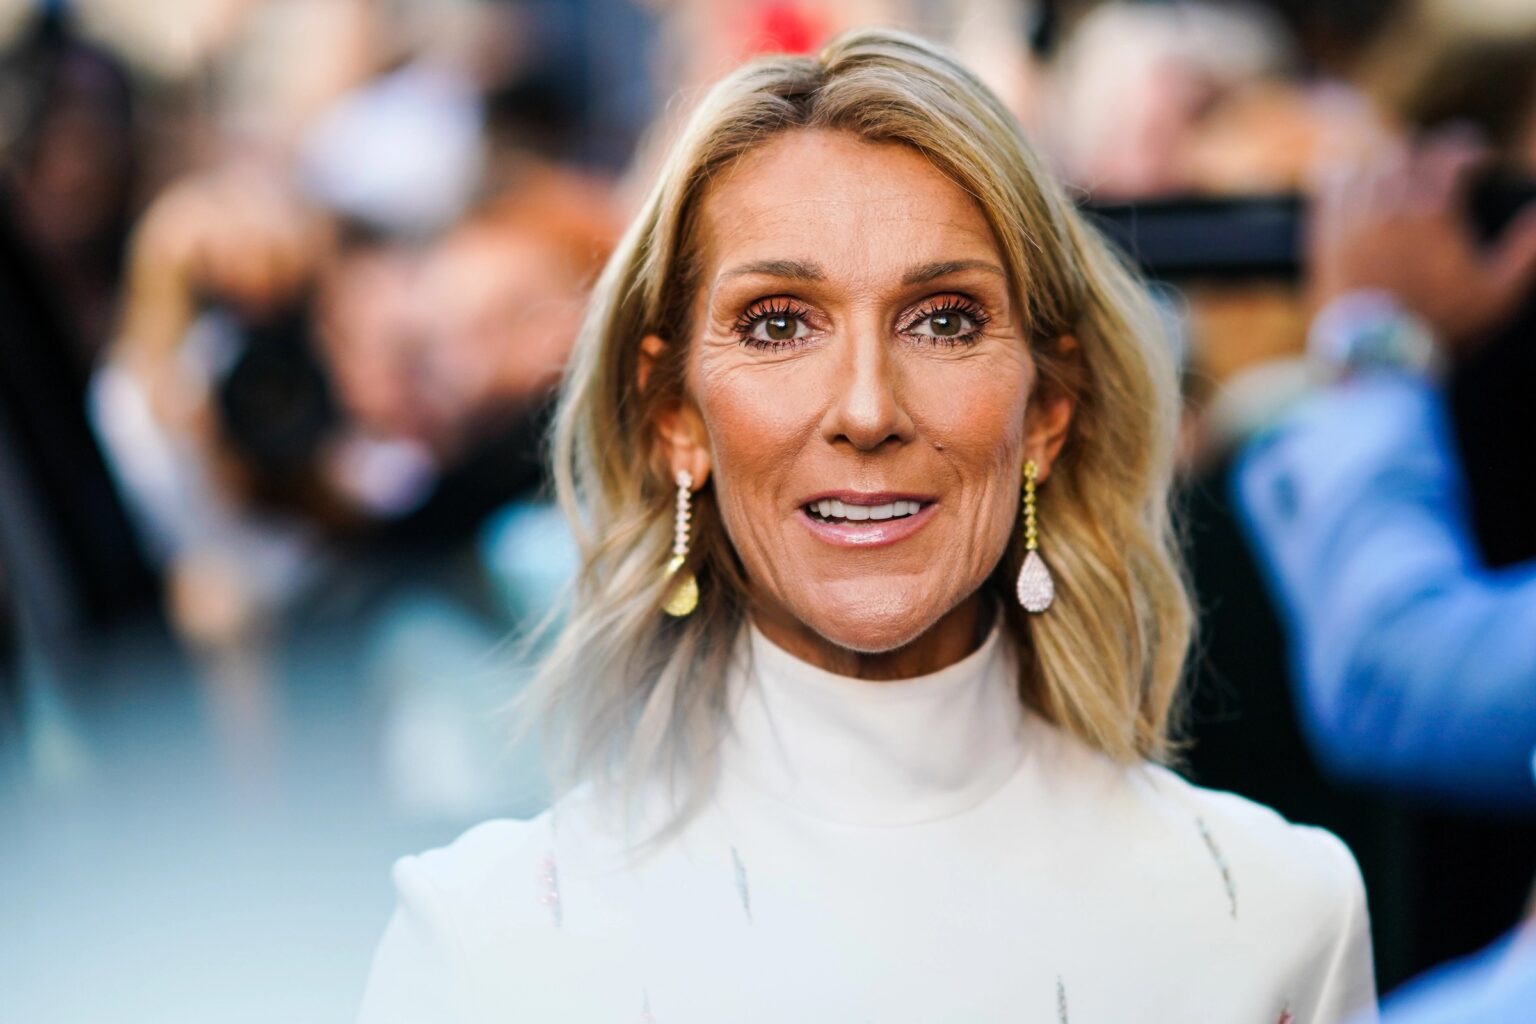 The iconic artist Celine Dion has recently been diagnosed with a life-changing syndrome. Will she ever perform her songs live again?